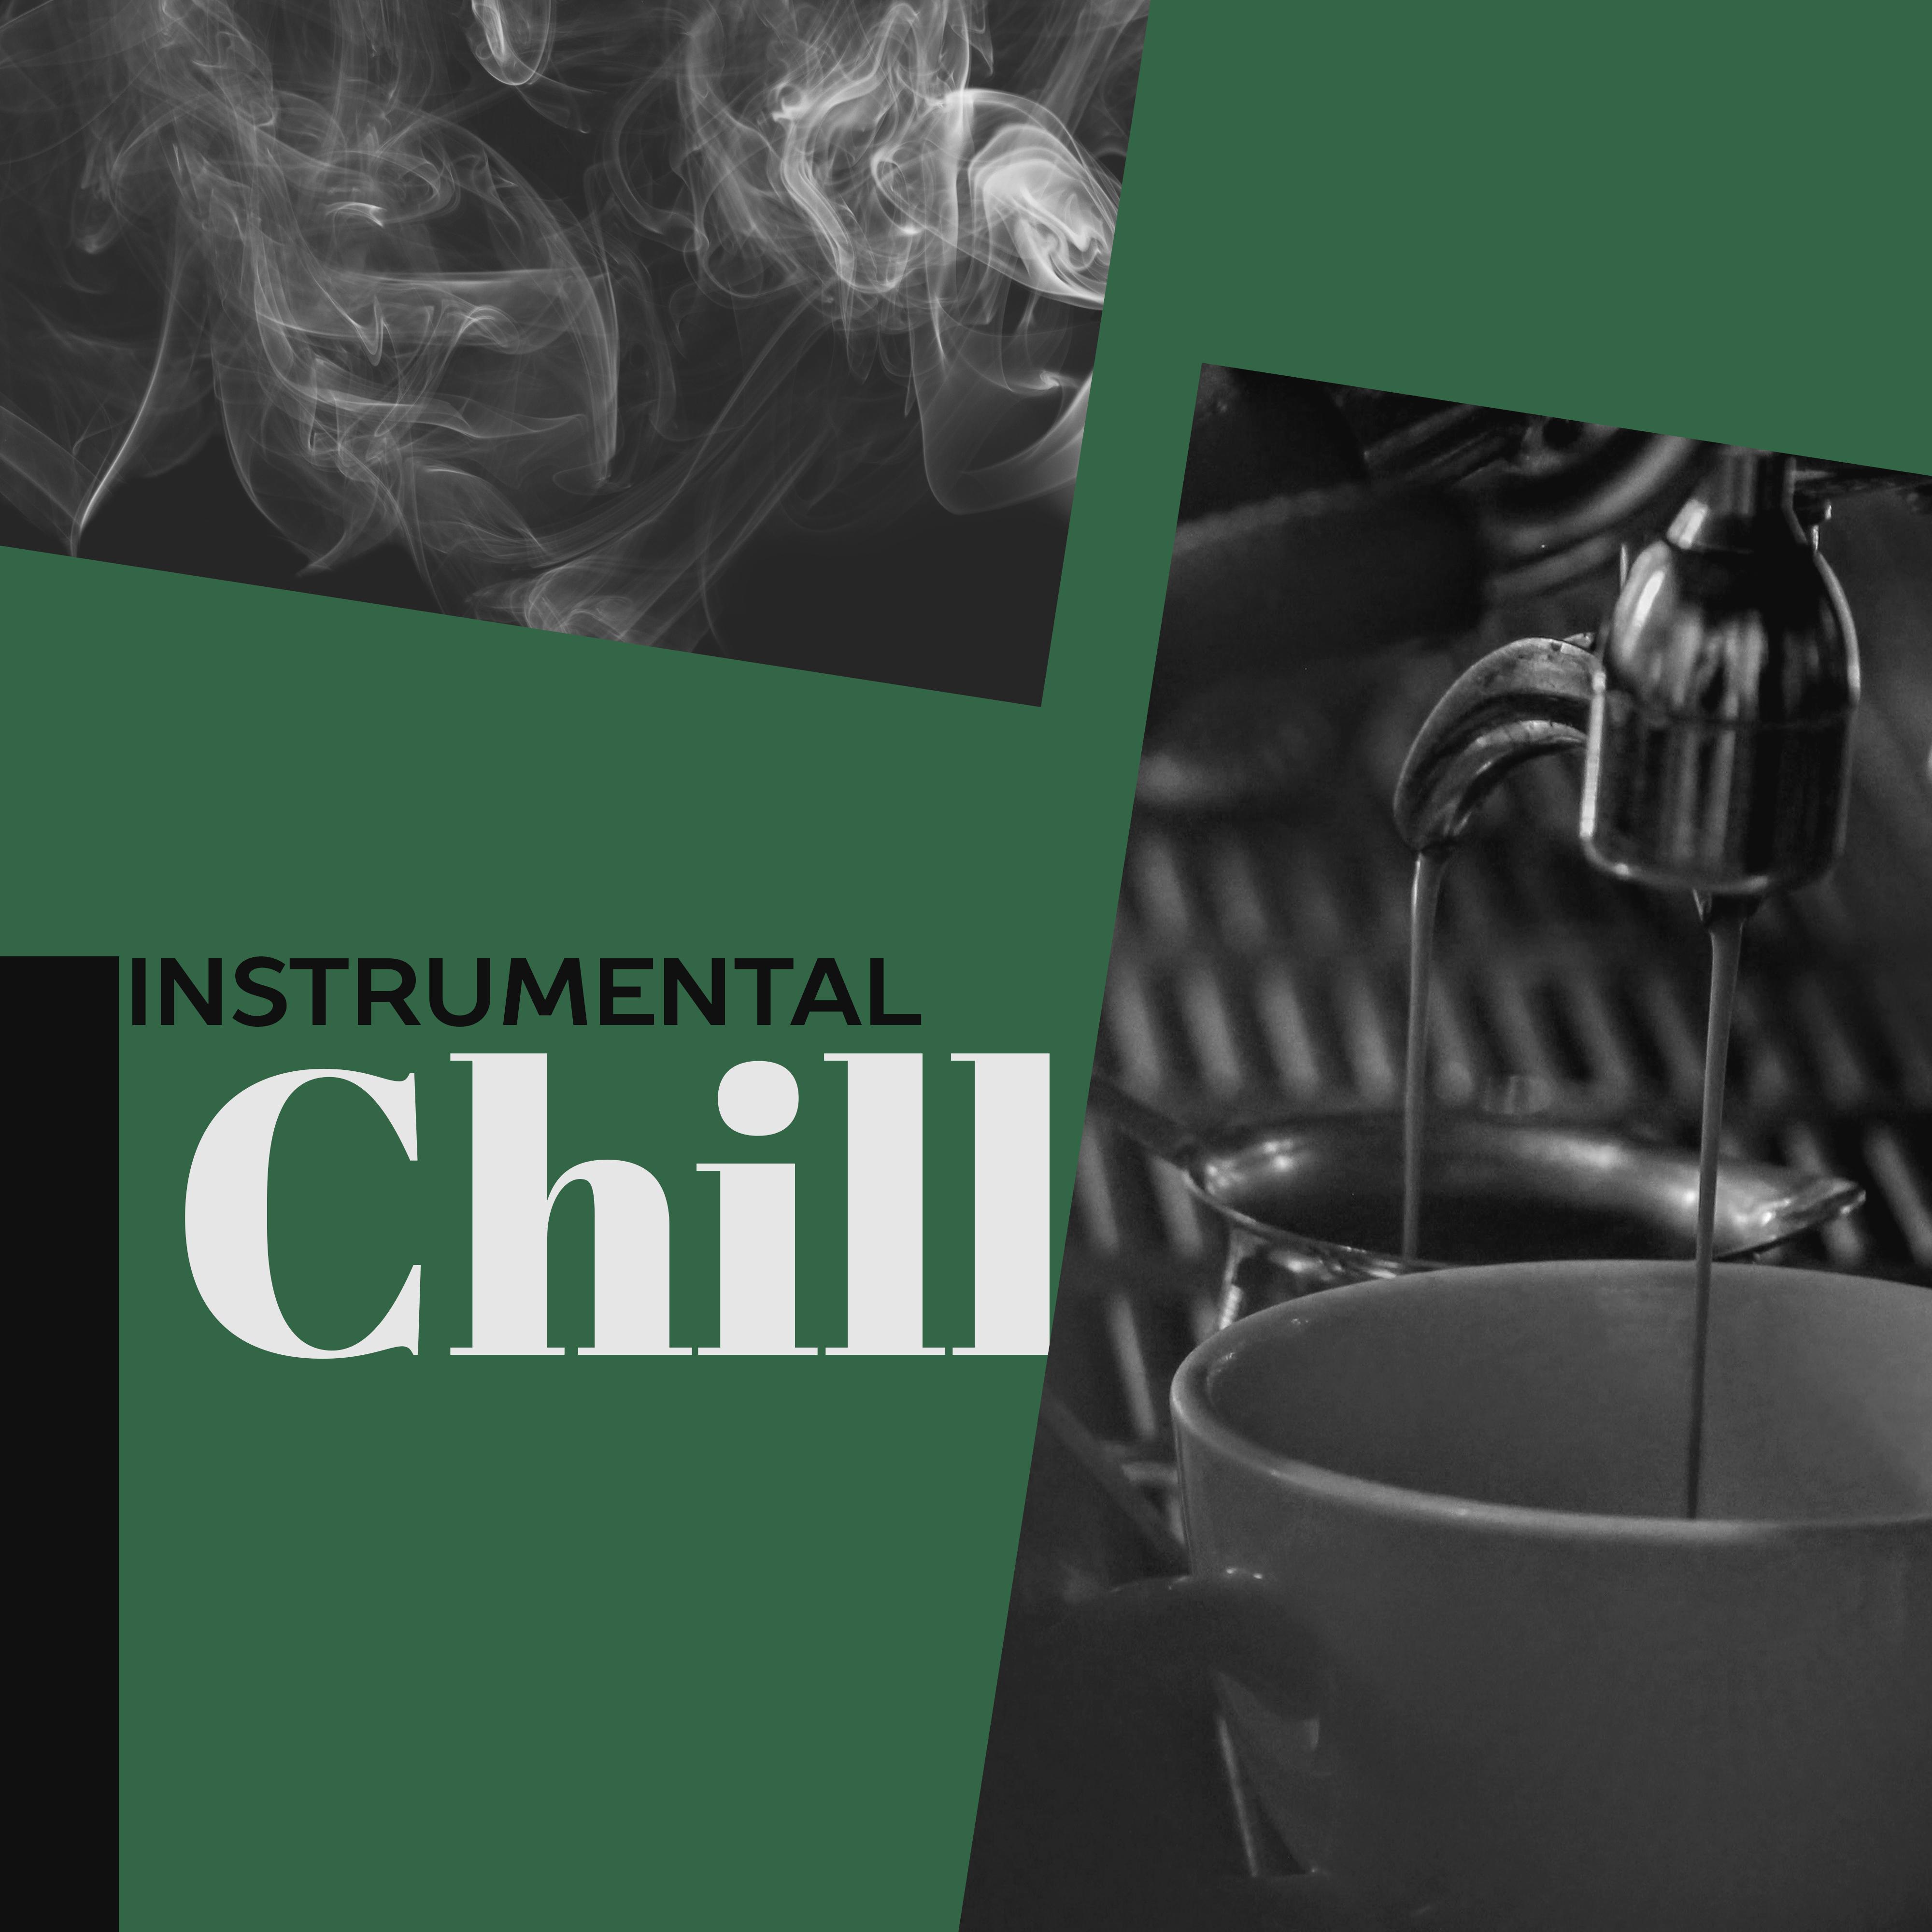 Instrumental Chill  Restaurant Music, Smooth Jazz, Relaxation Sounds, Piano Bar, Cafe Sounds, Guitar Jazz